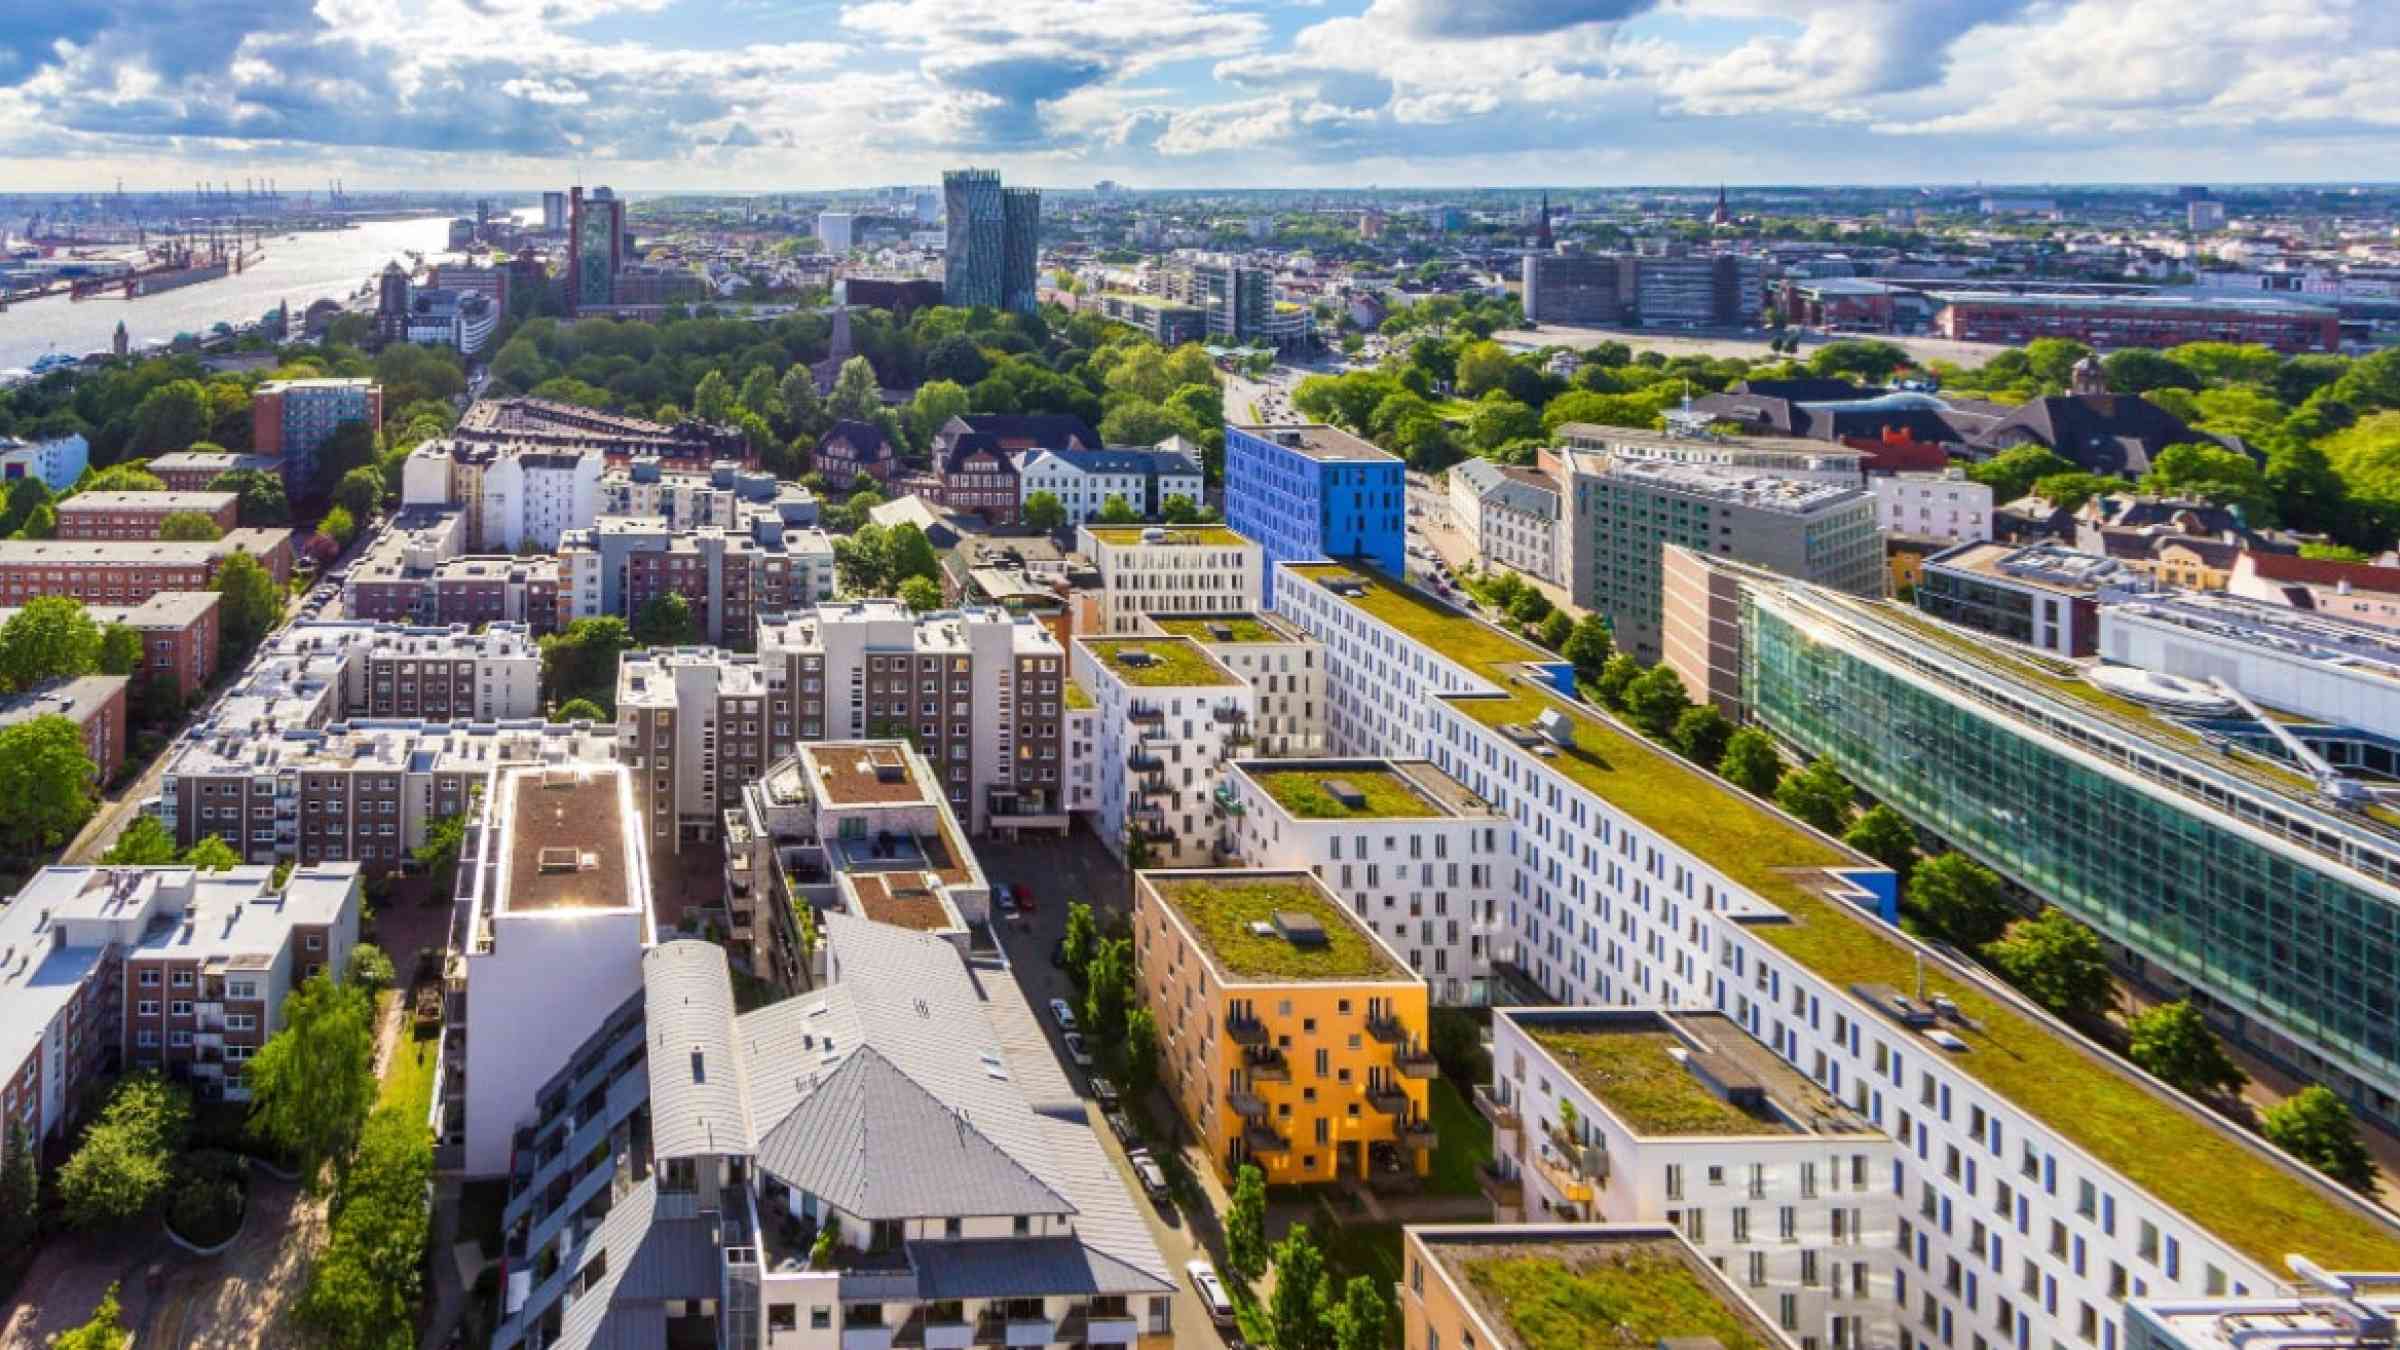 Green city with multiple green roofs